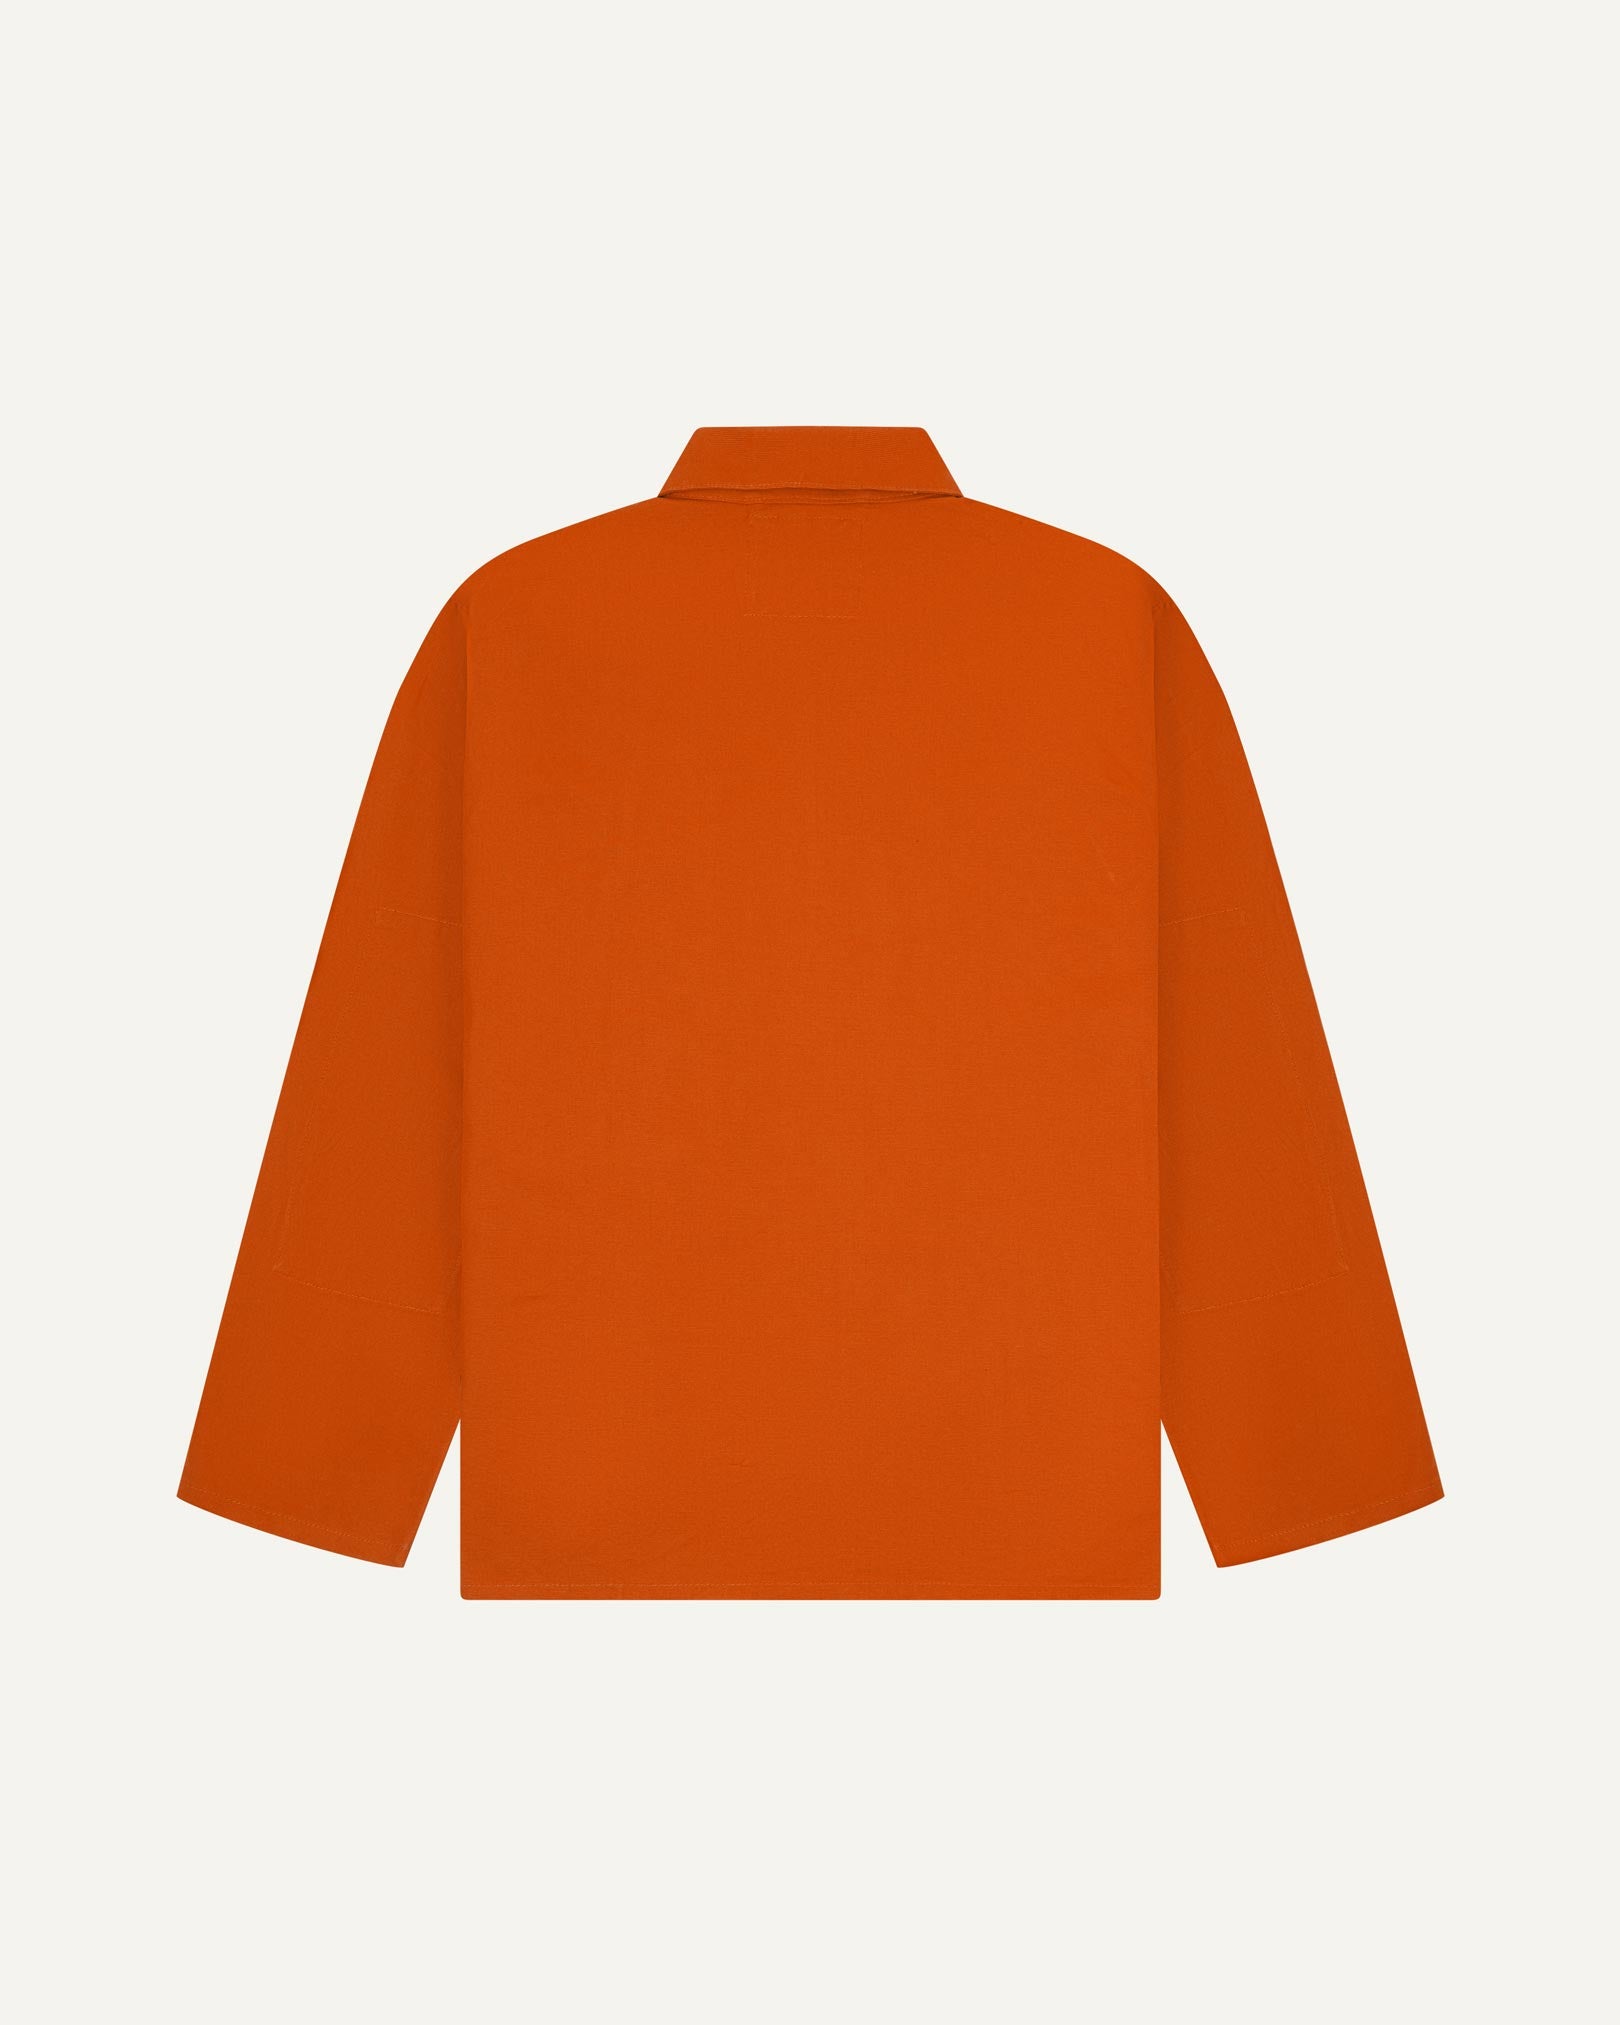 Back view of golden-orange, buttoned organic cotton overshirt with view of reinforced elbow area and boxy silhouette.